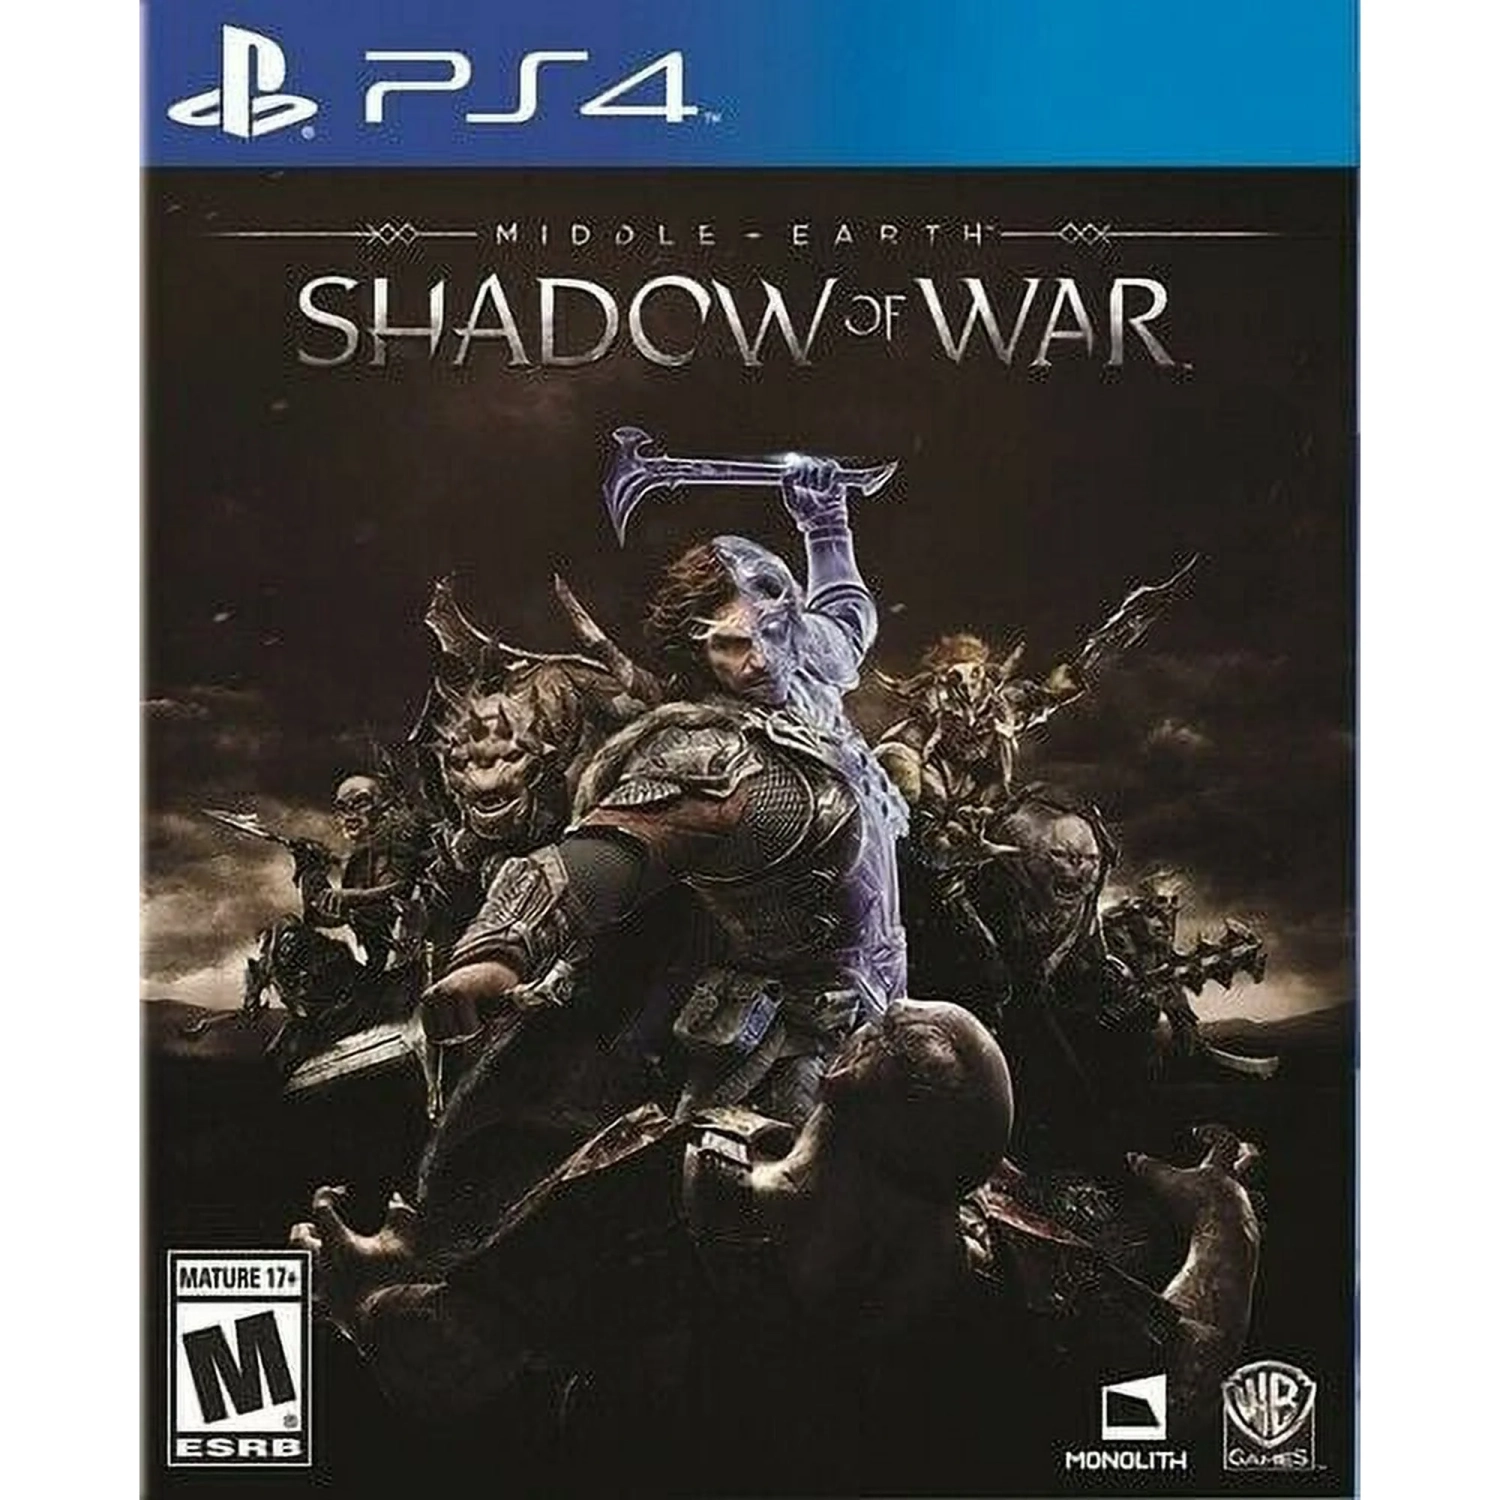 Middle-Earth: Shadow of War for PlayStation 4 [VIDEOGAMES]